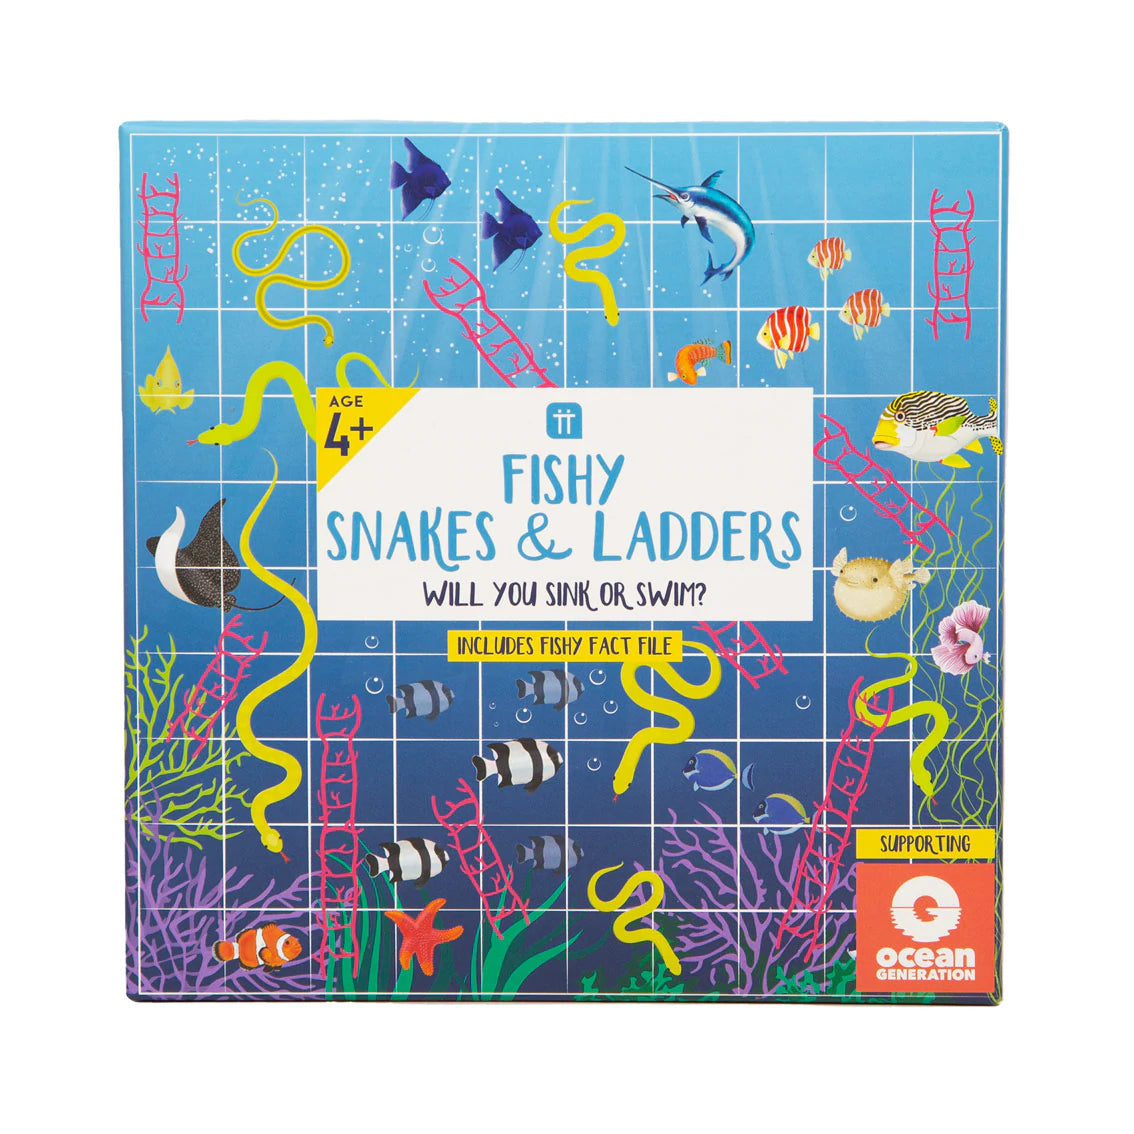 Fishy Snakes & Ladders Game